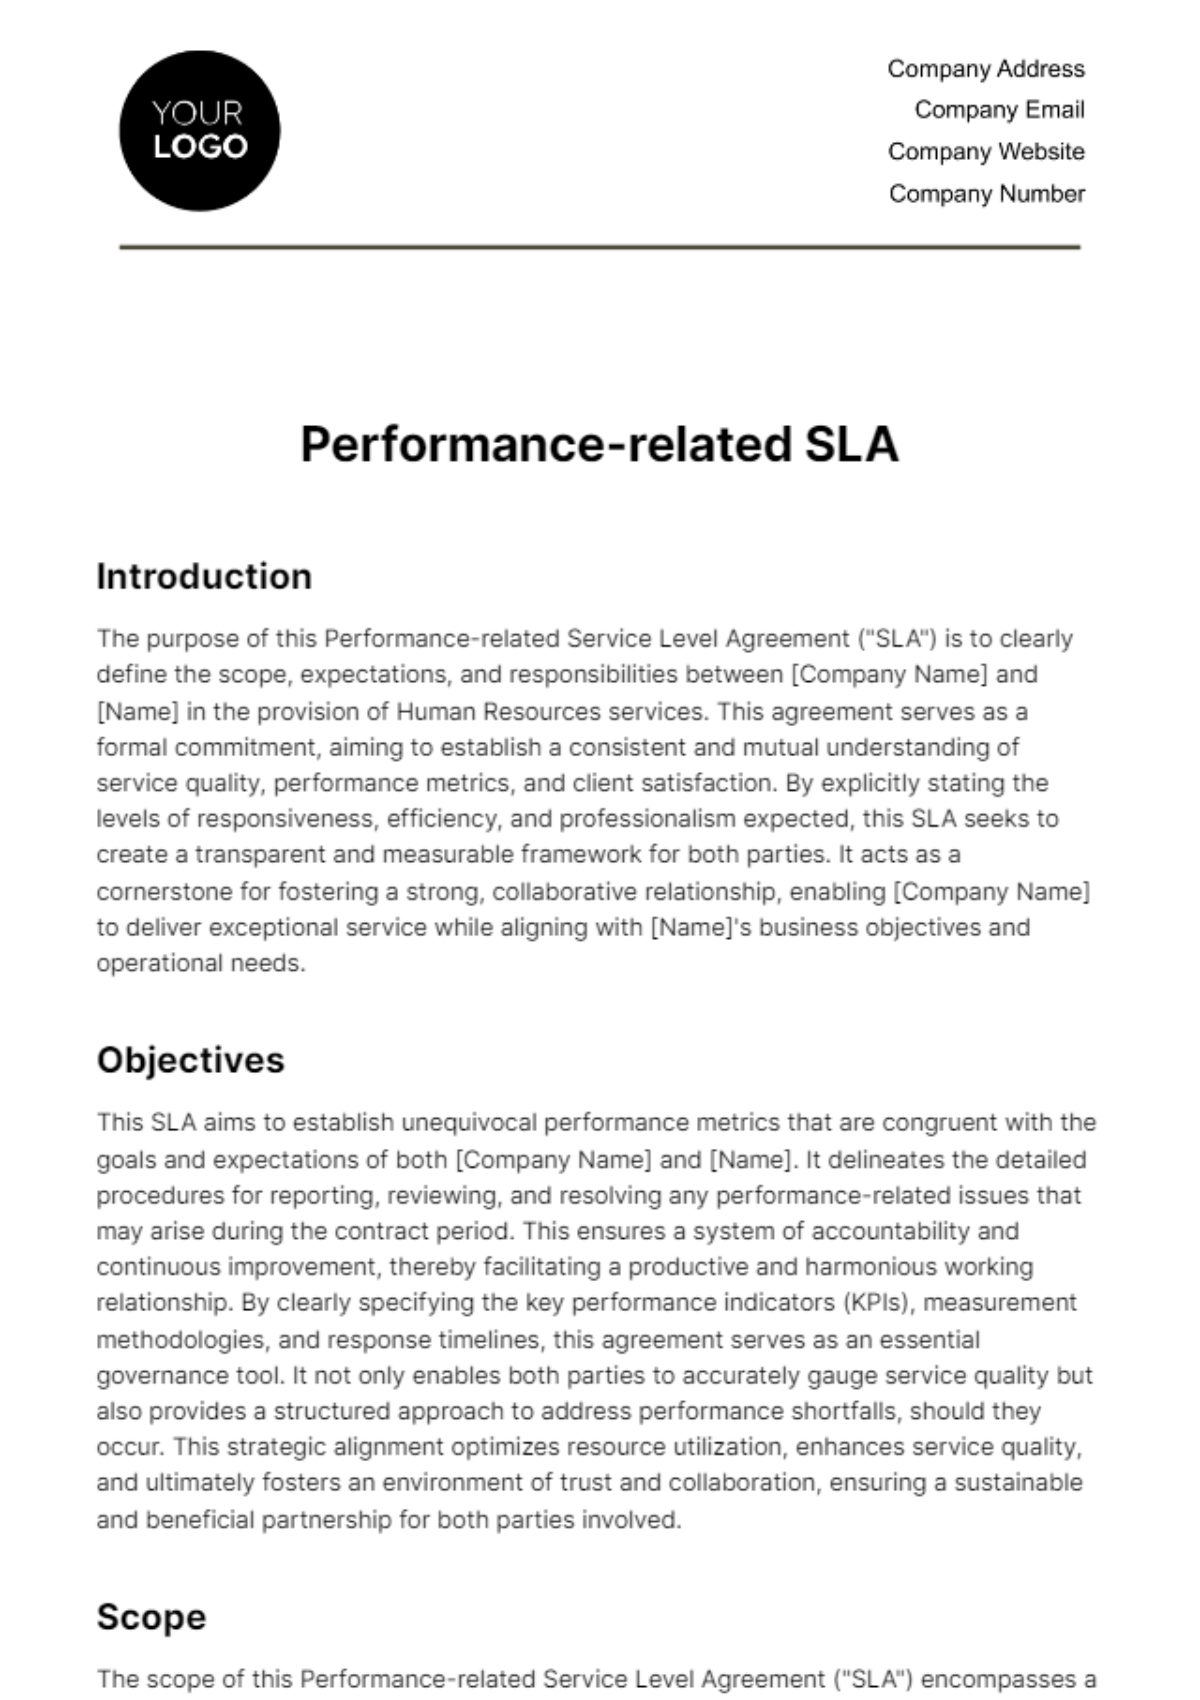 Performance-related SLA HR Template